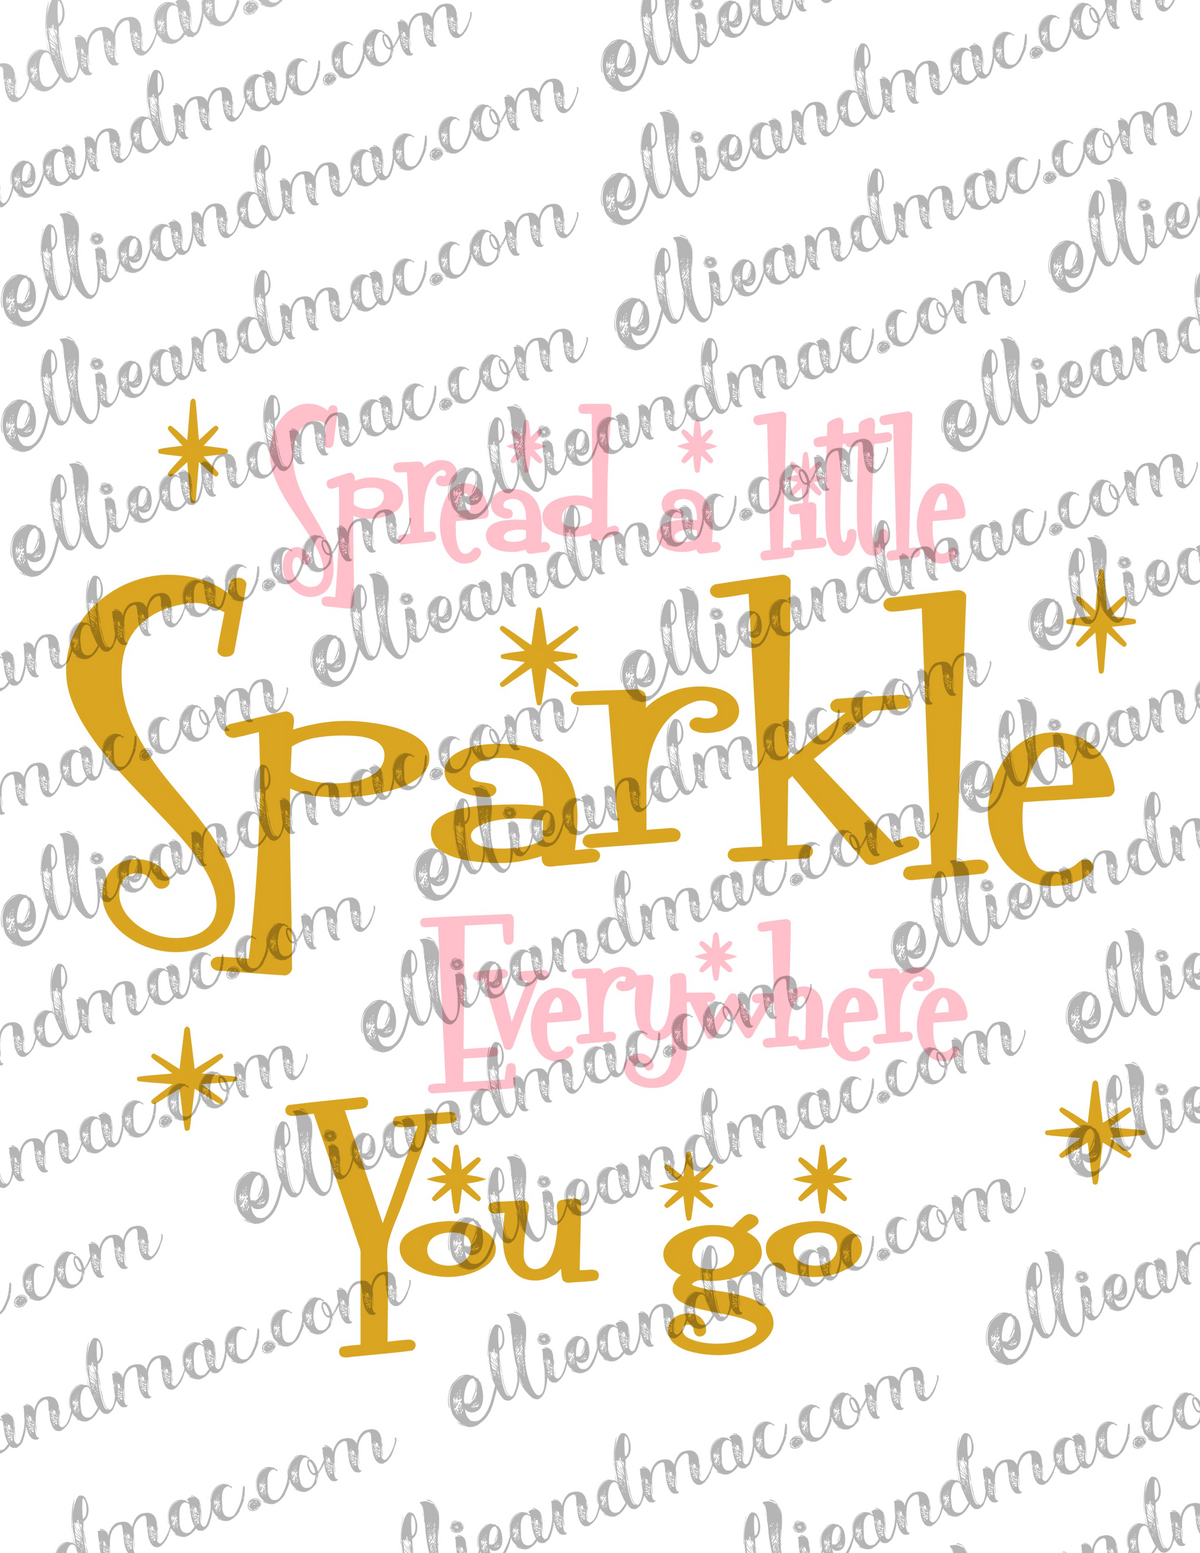 Spread A Little Sparkle Everywhere You Go SVG Cutting File